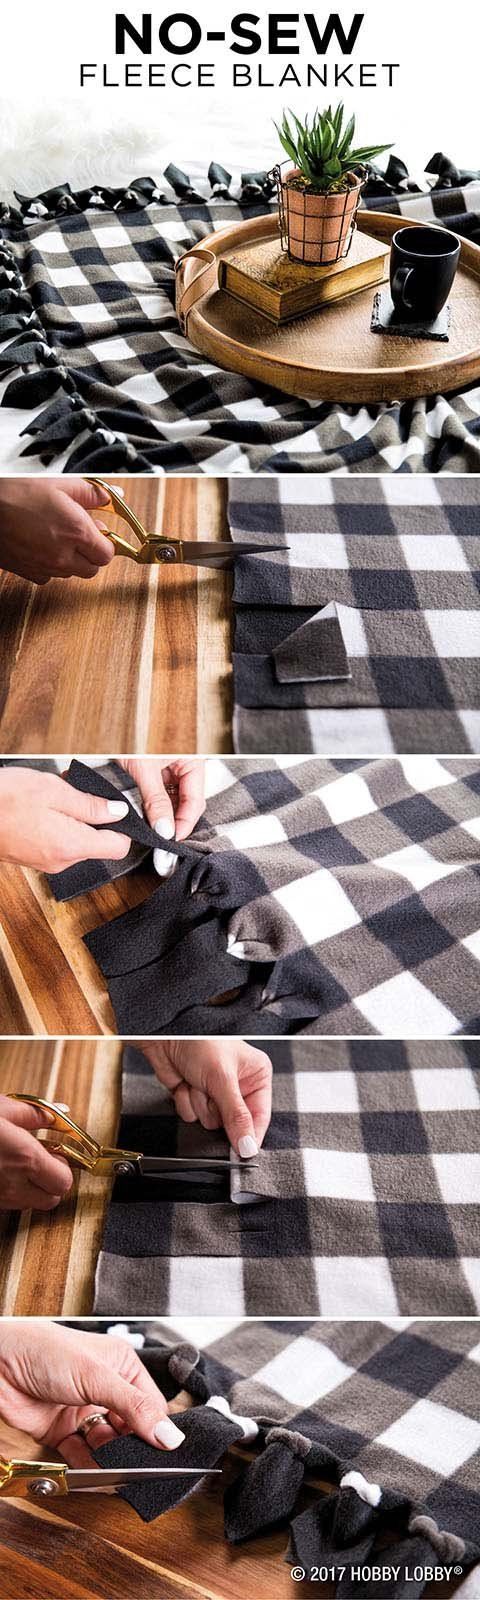 Cozy up to fall with a snug, no-sew fleece blanket!